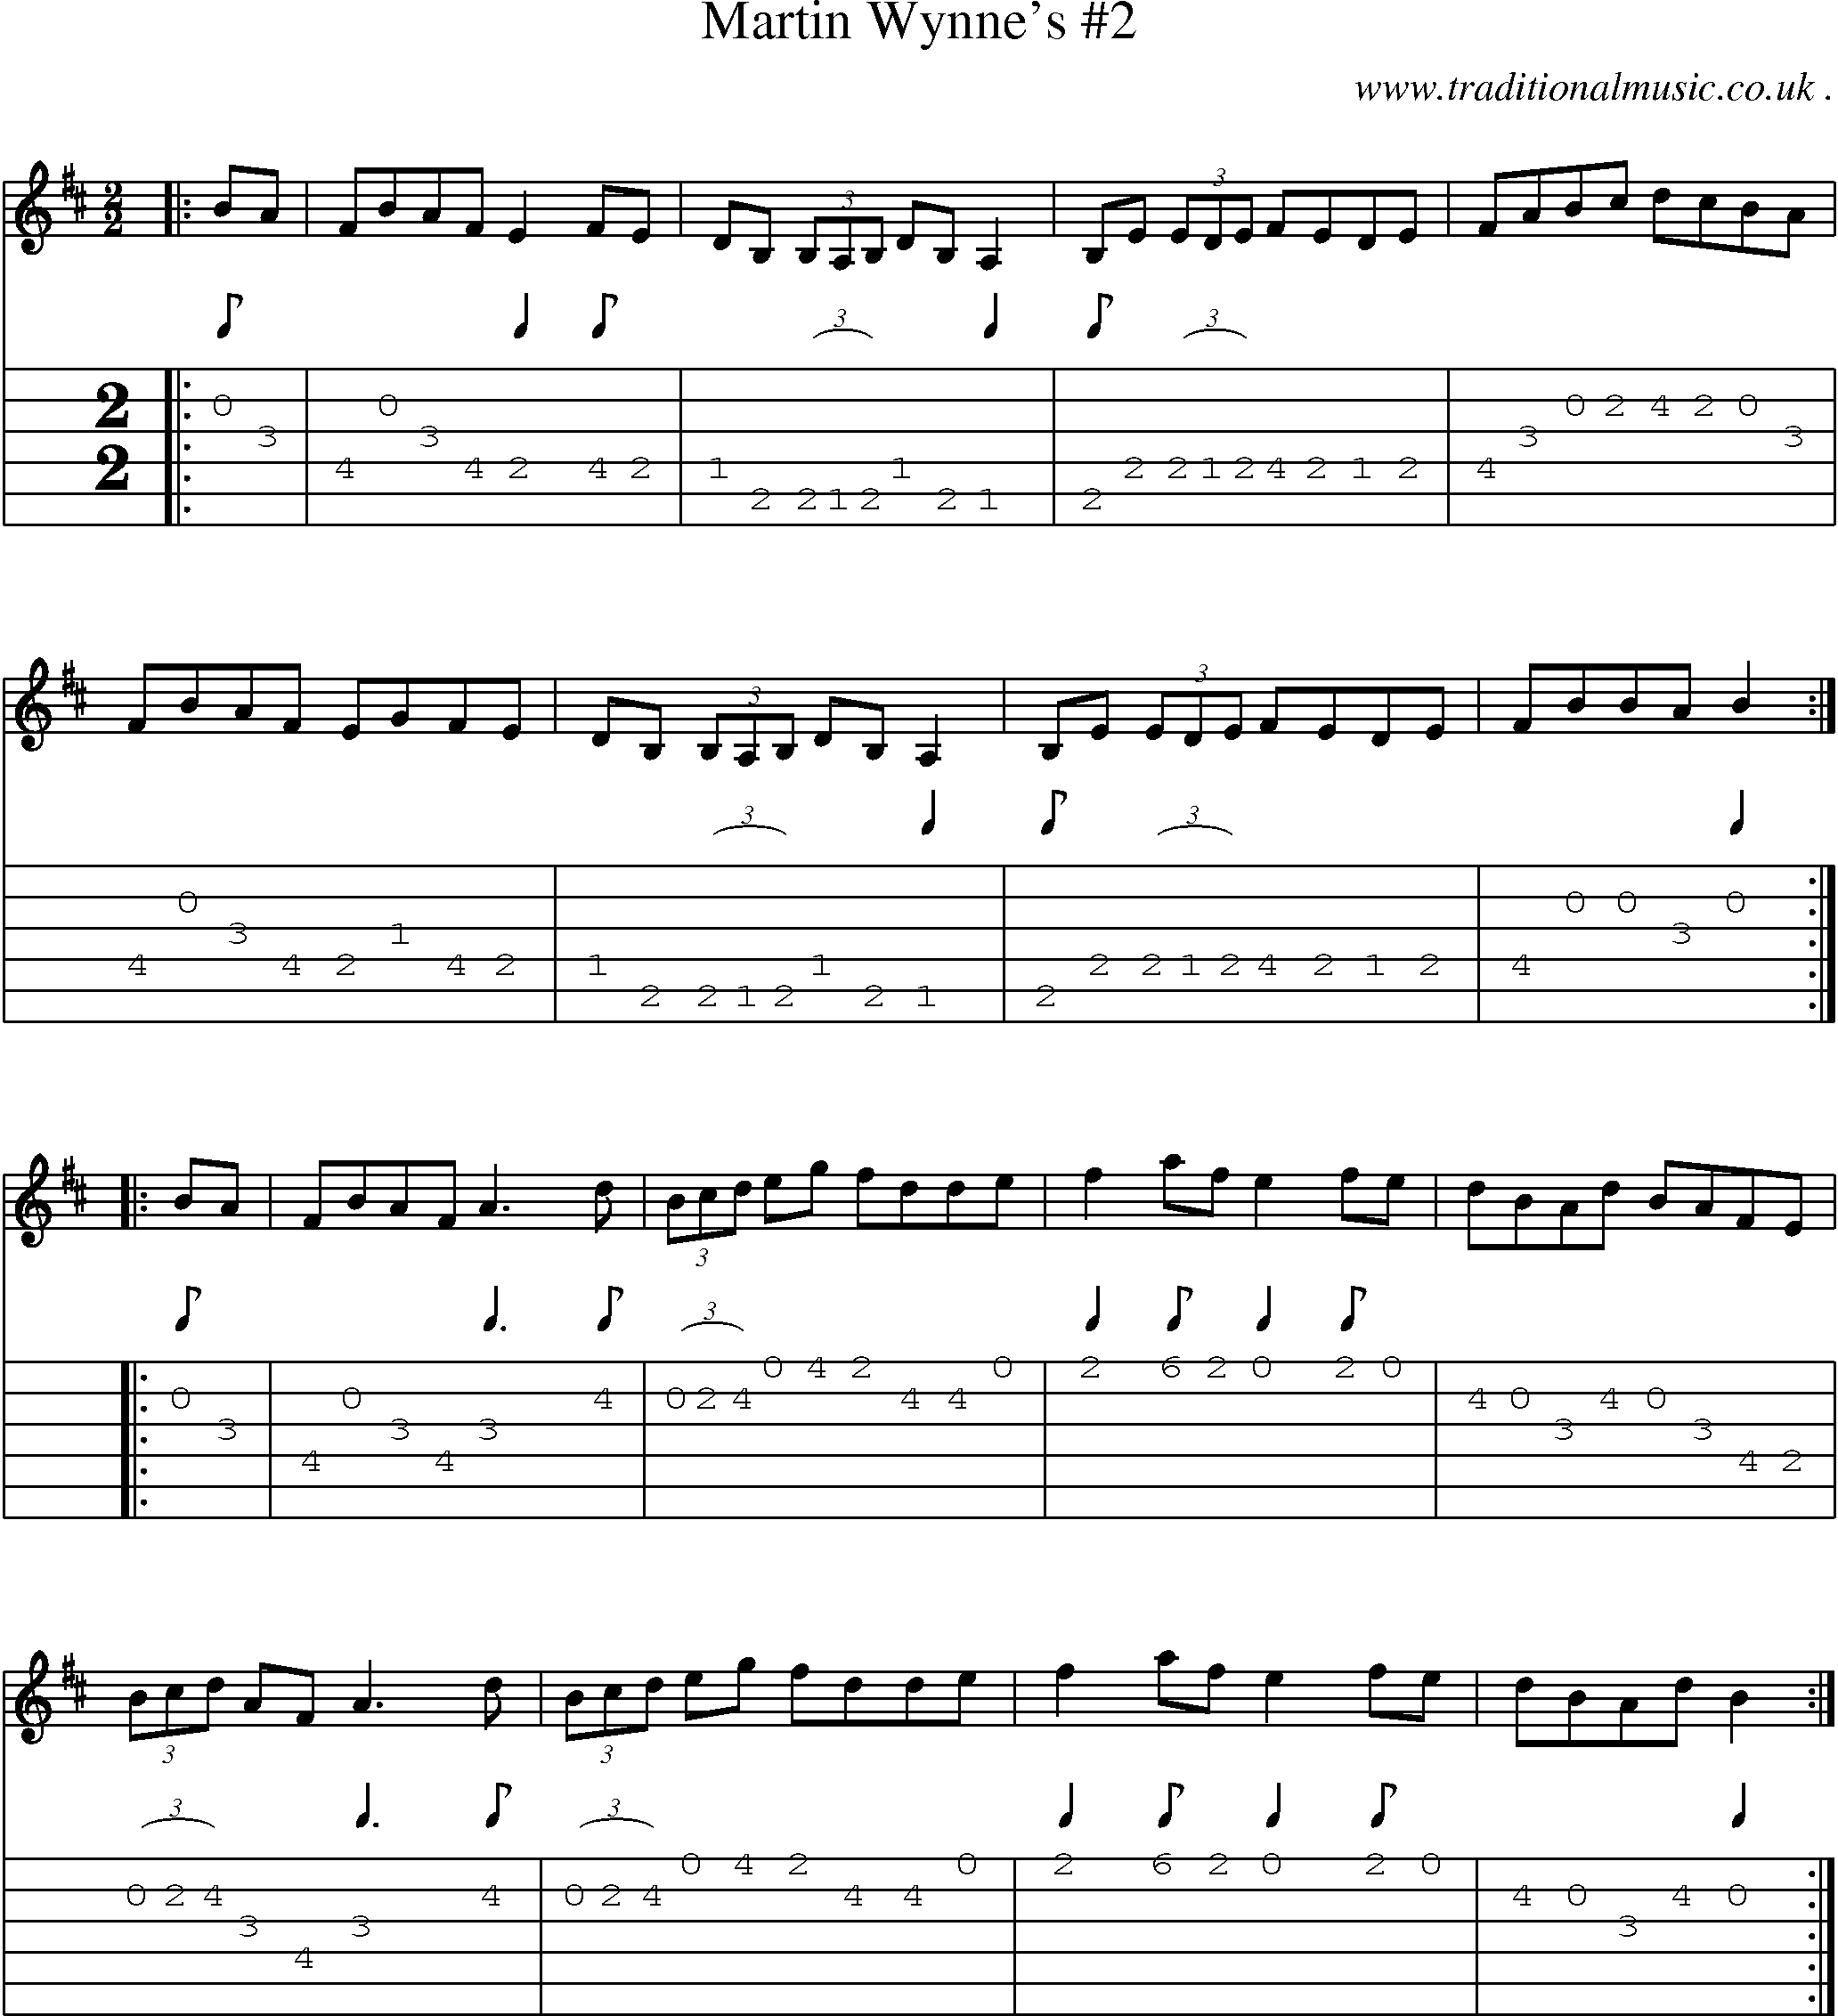 Sheet-Music and Guitar Tabs for Martin Wynnes 2